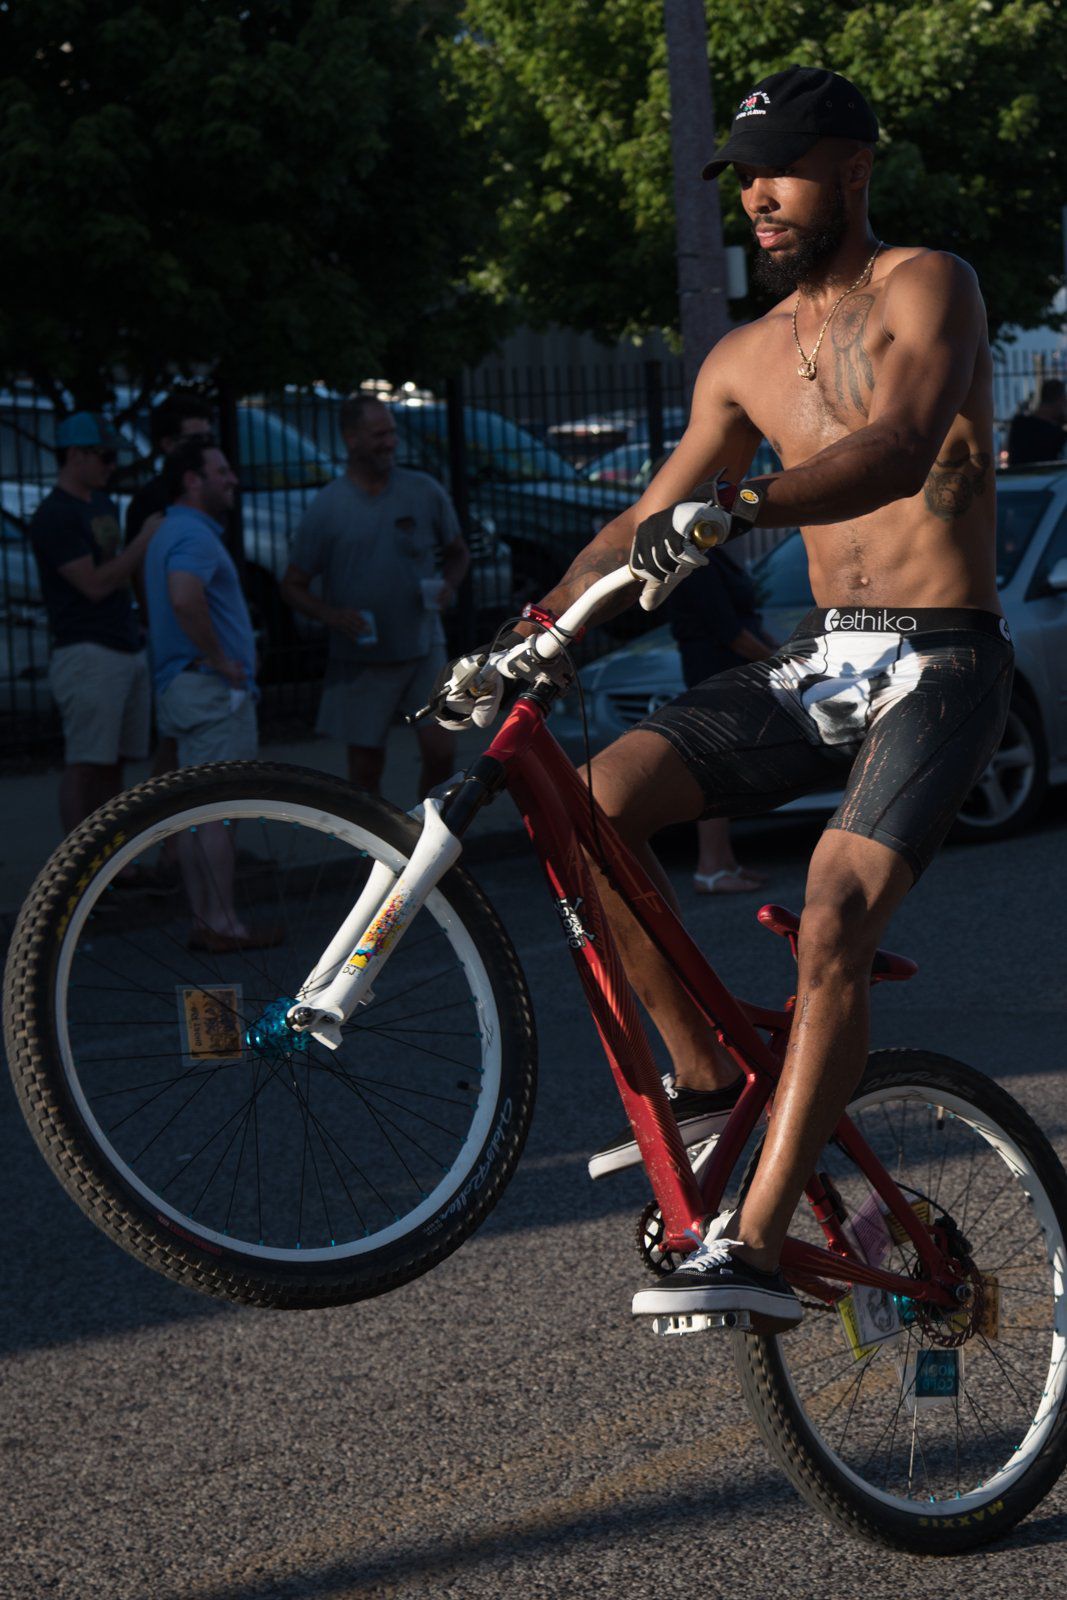 The World Naked Bike Ride Was Hotter Than Ever in 2019 